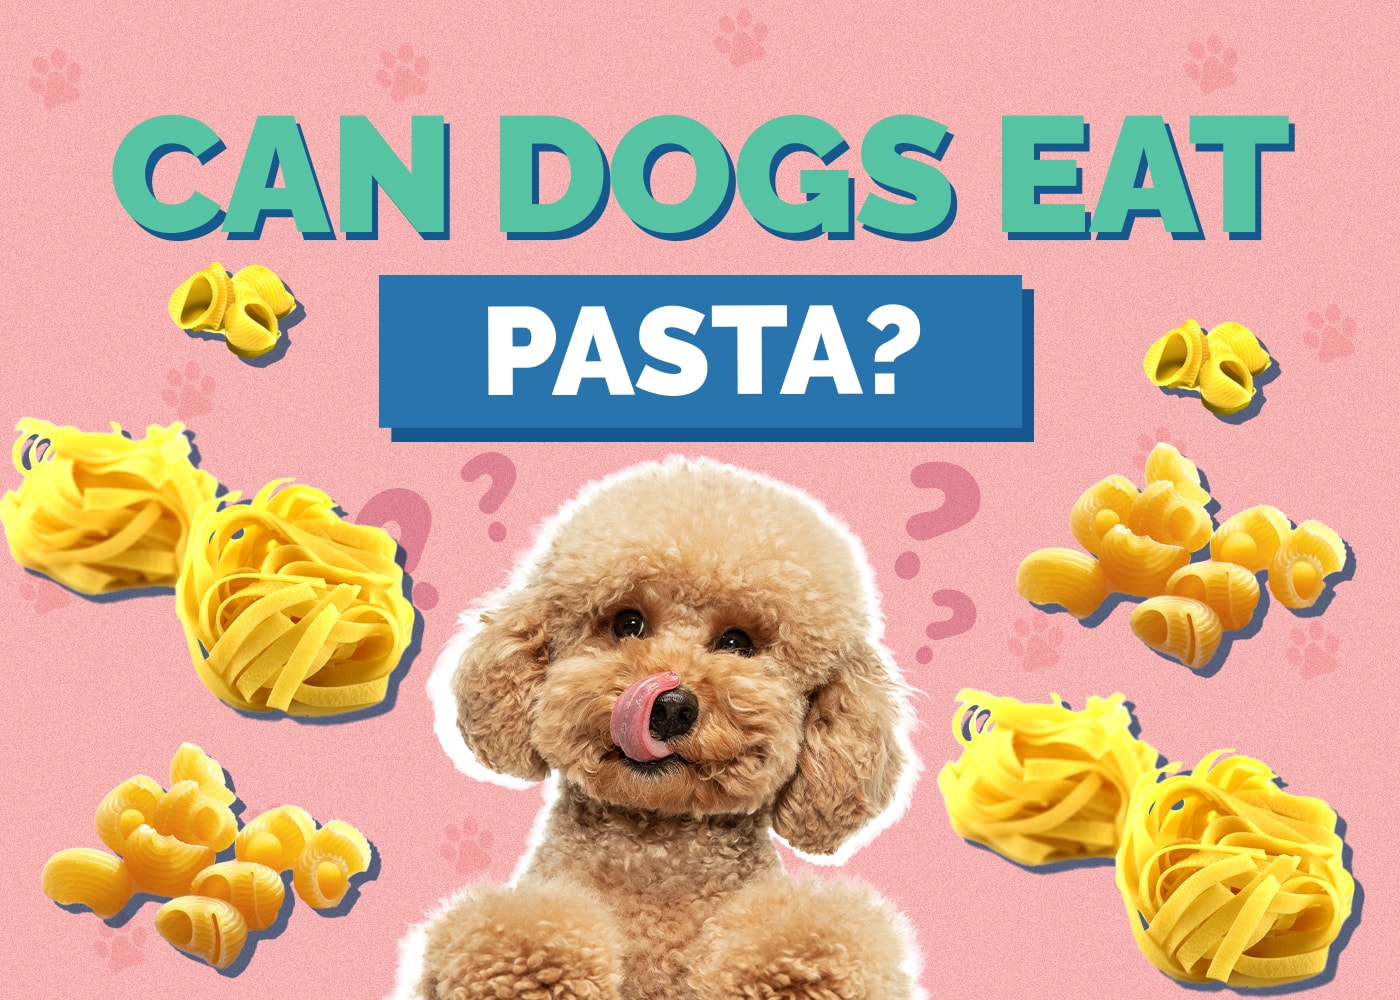 Can Dogs Eat pasta